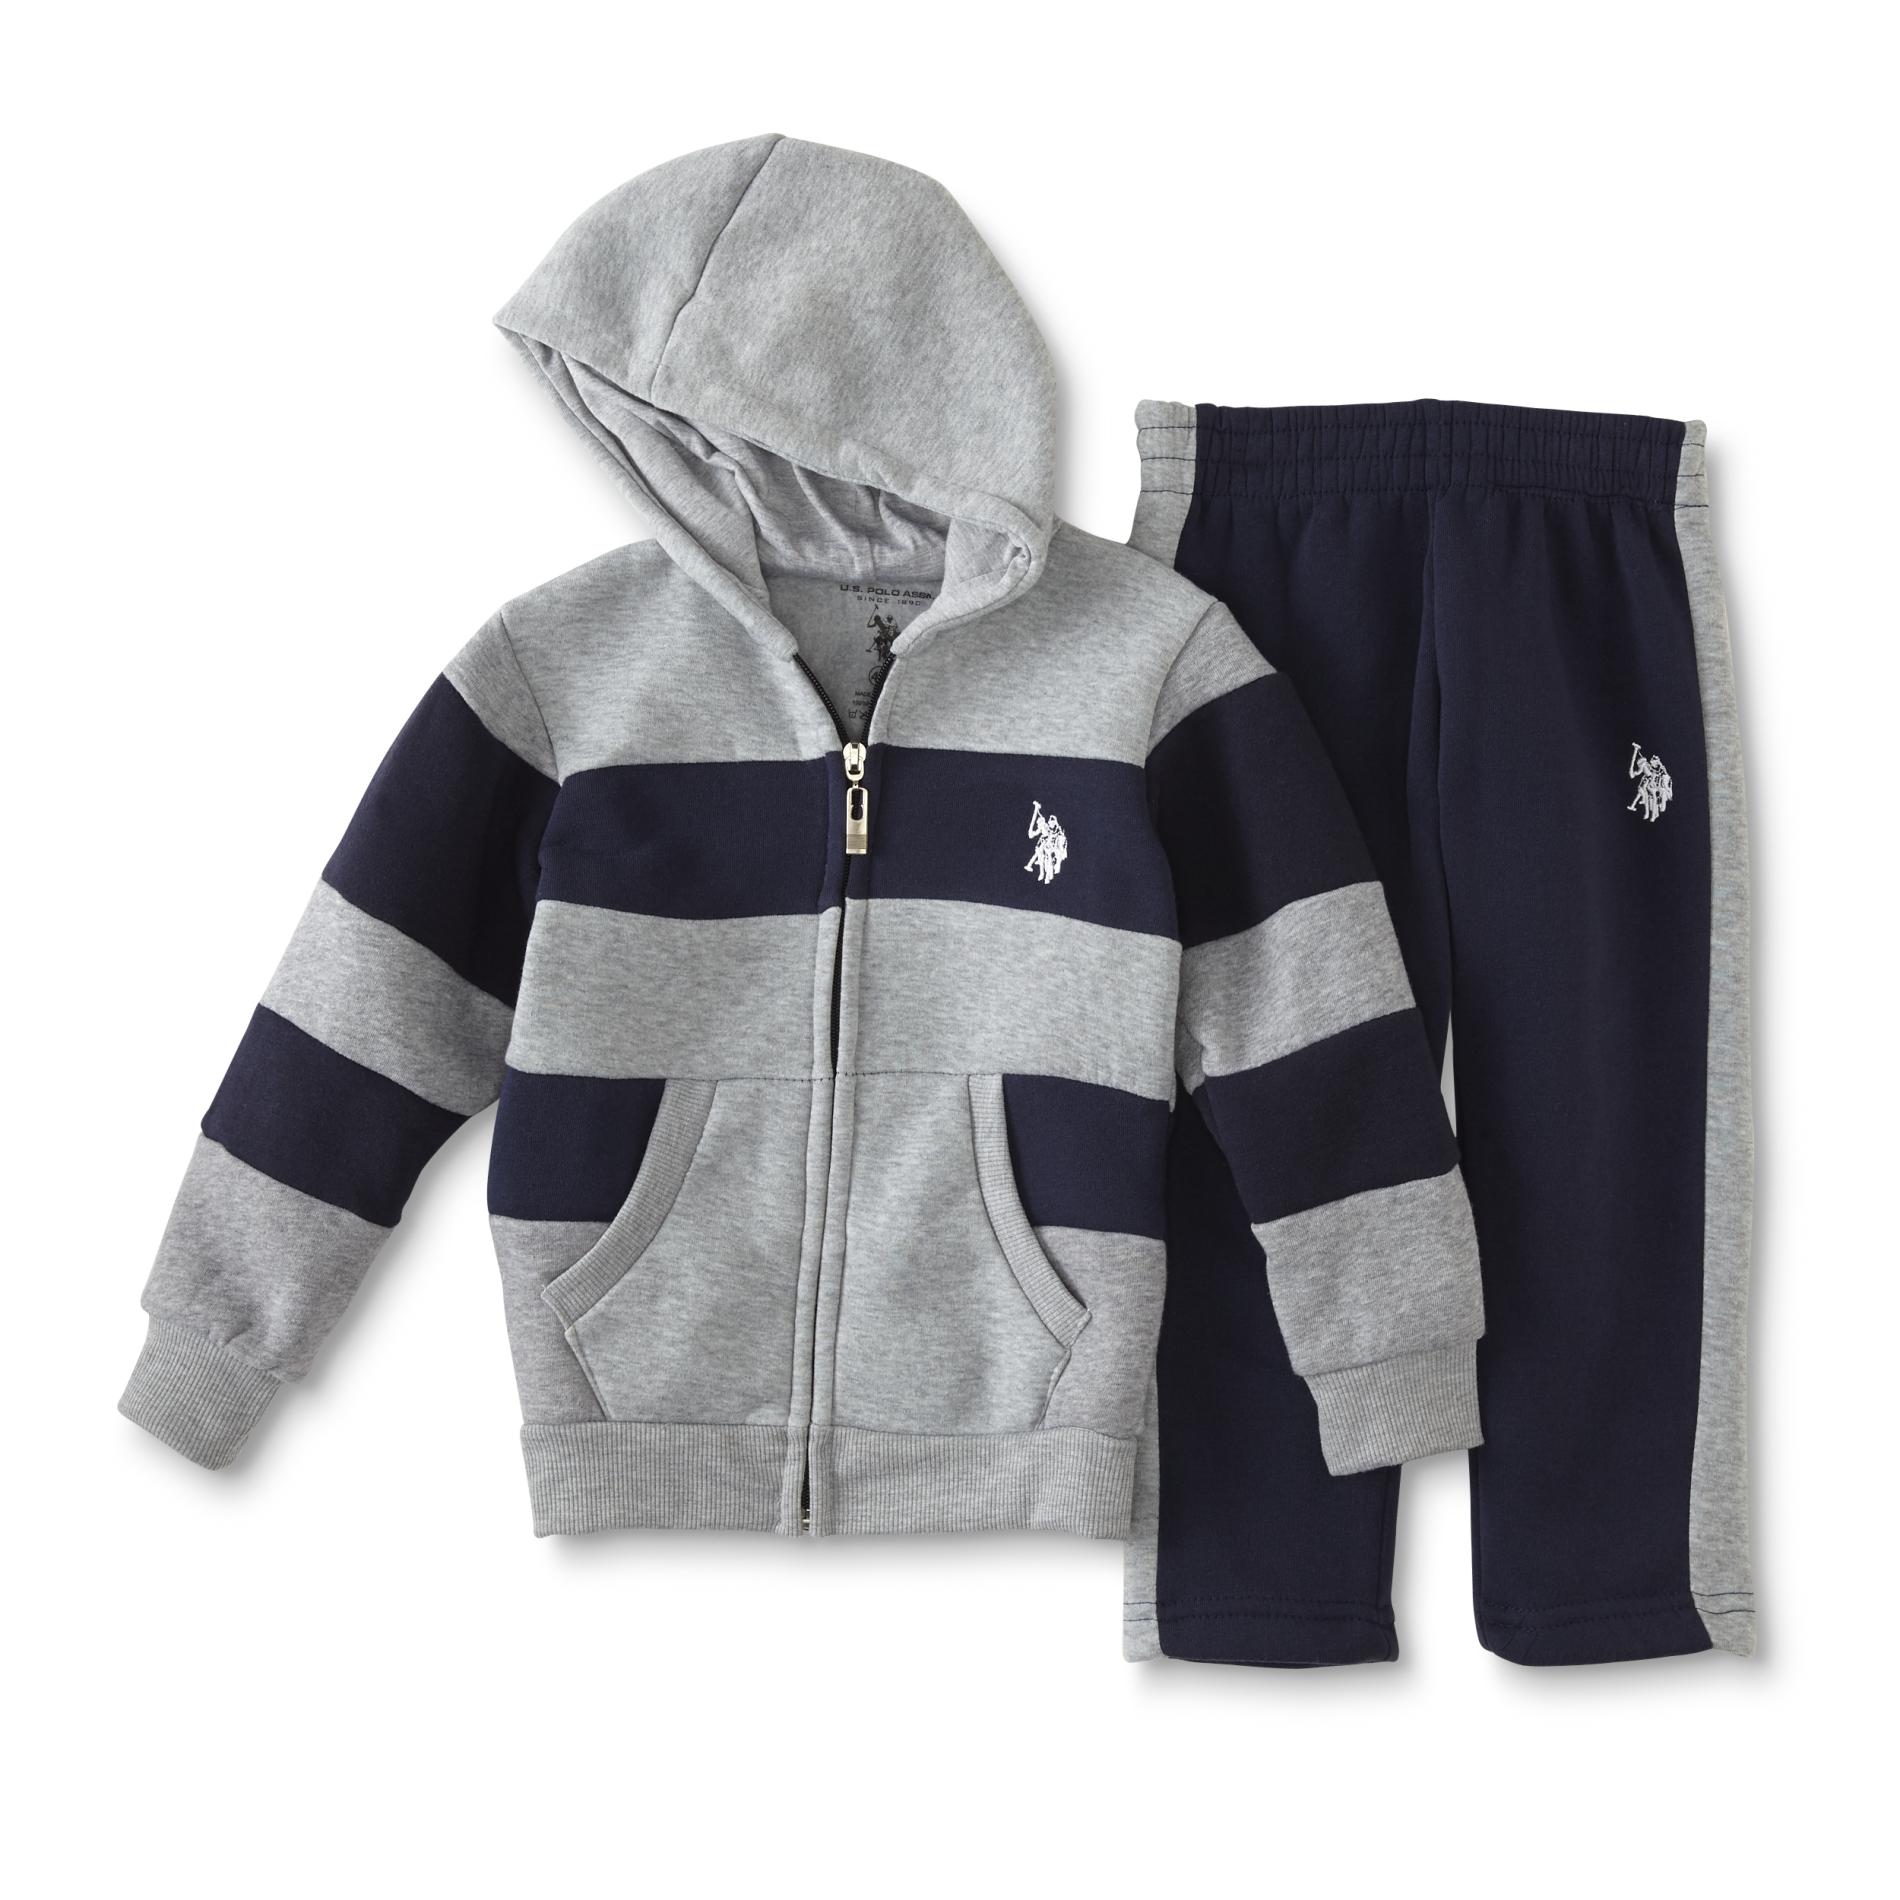 U.S. Polo Assn. Infant & Toddler Boys' Hoodie Jacket & Sweatpants - Rugby Striped